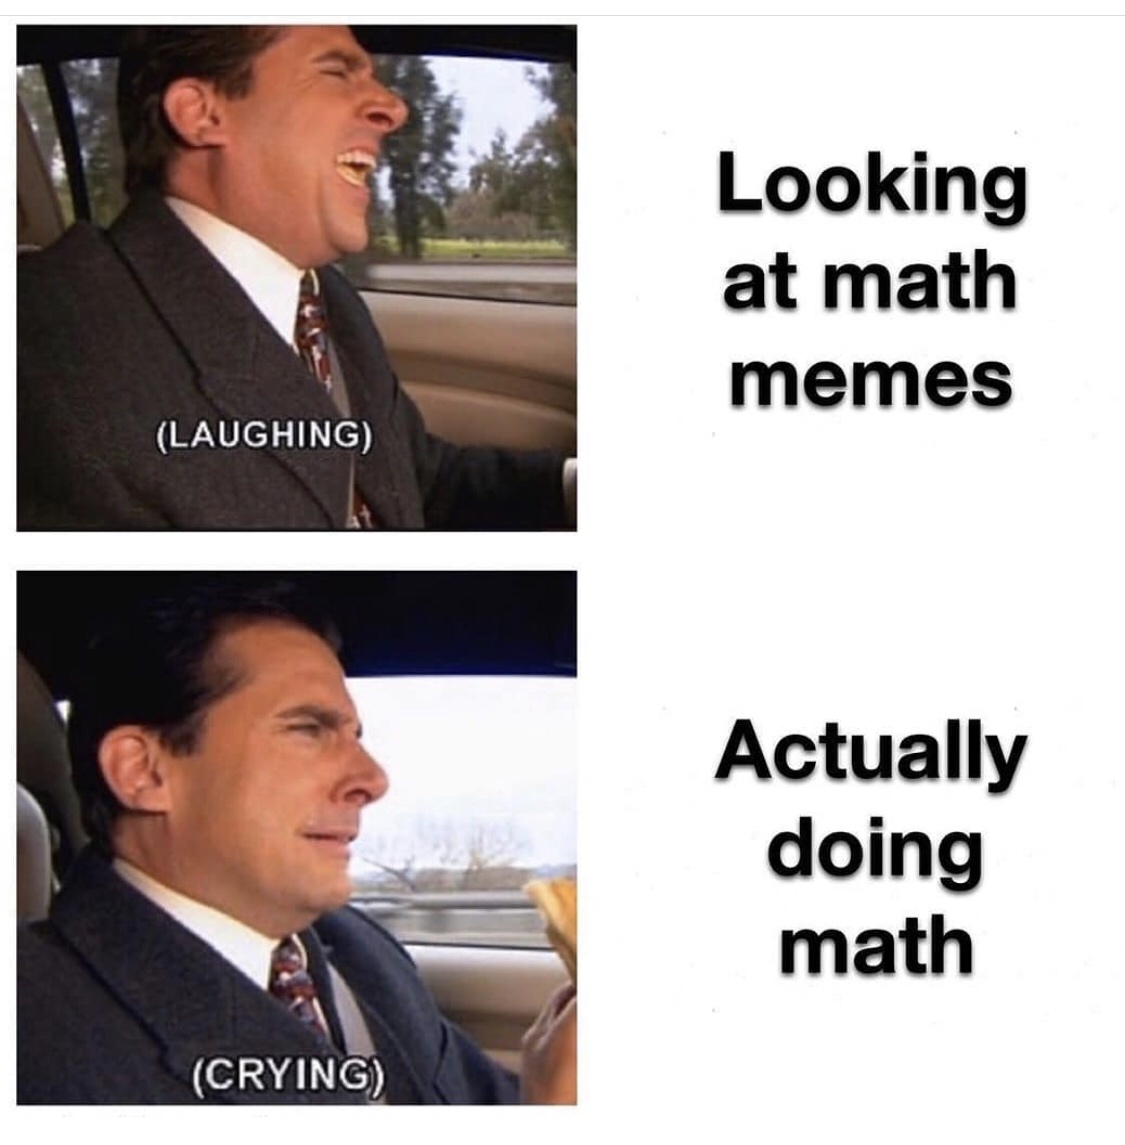 meme laughing crying - Looking at math memes Laughing Actually doing math Crying